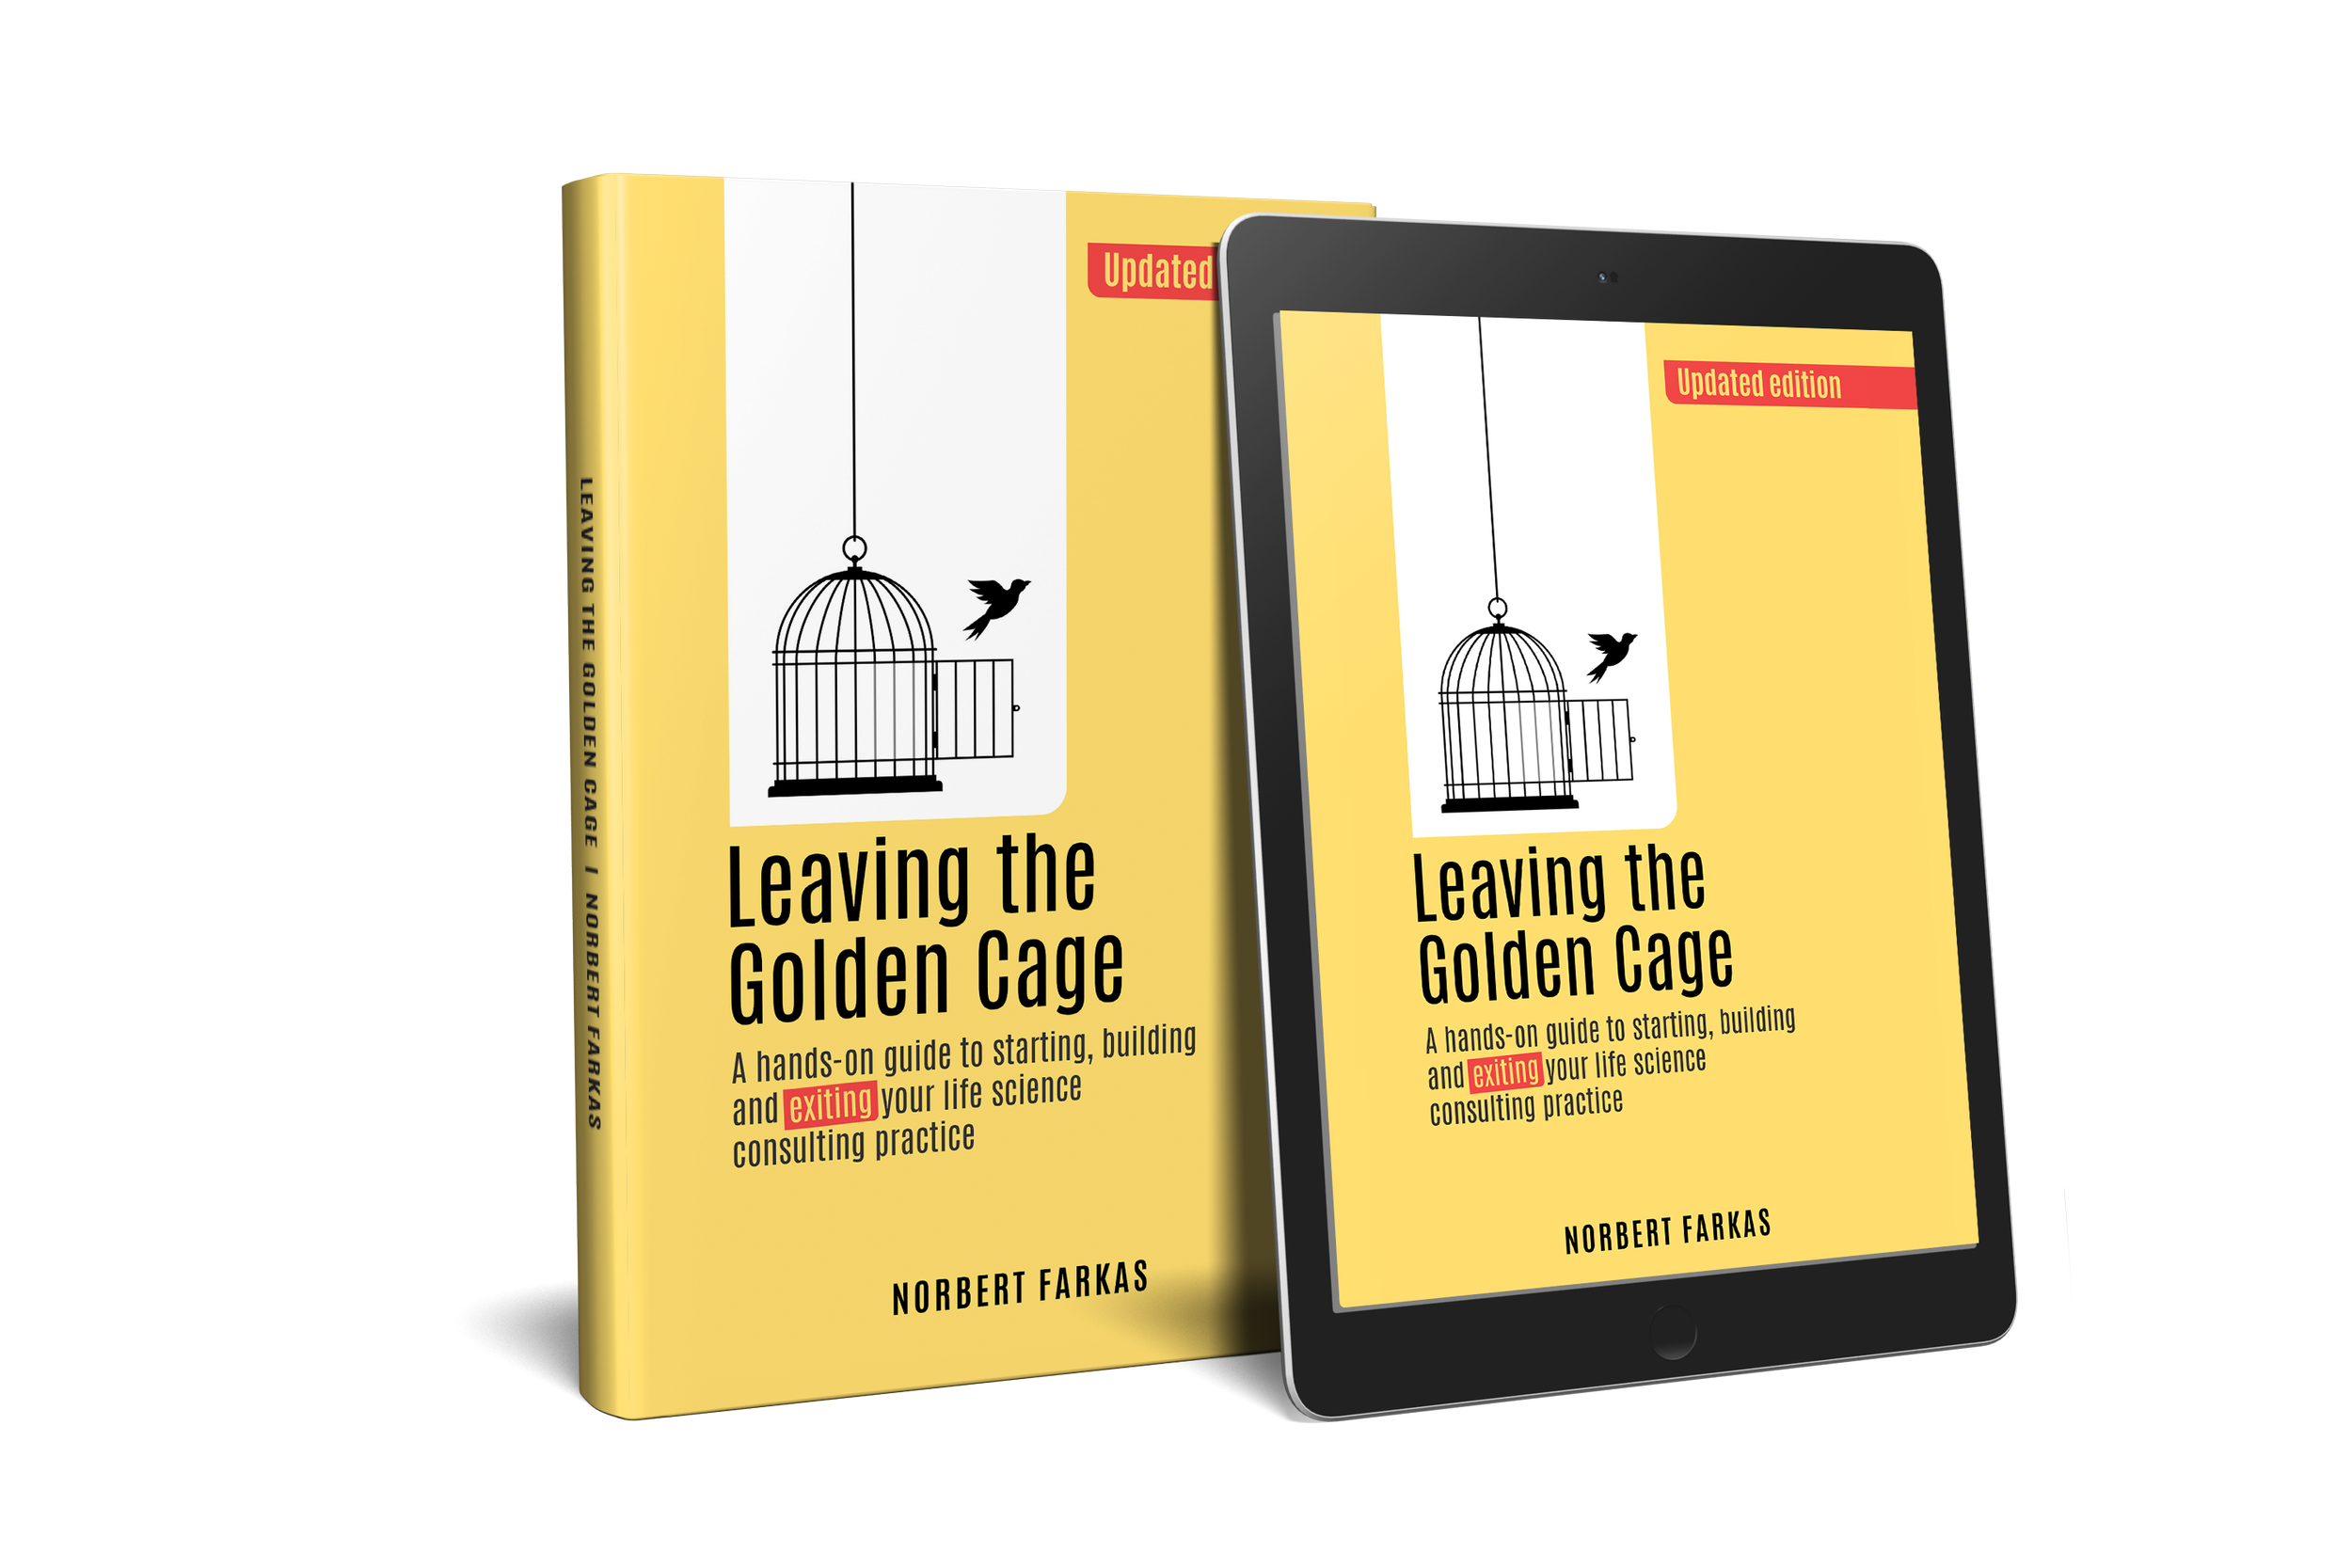 Leaving the Golden Cage